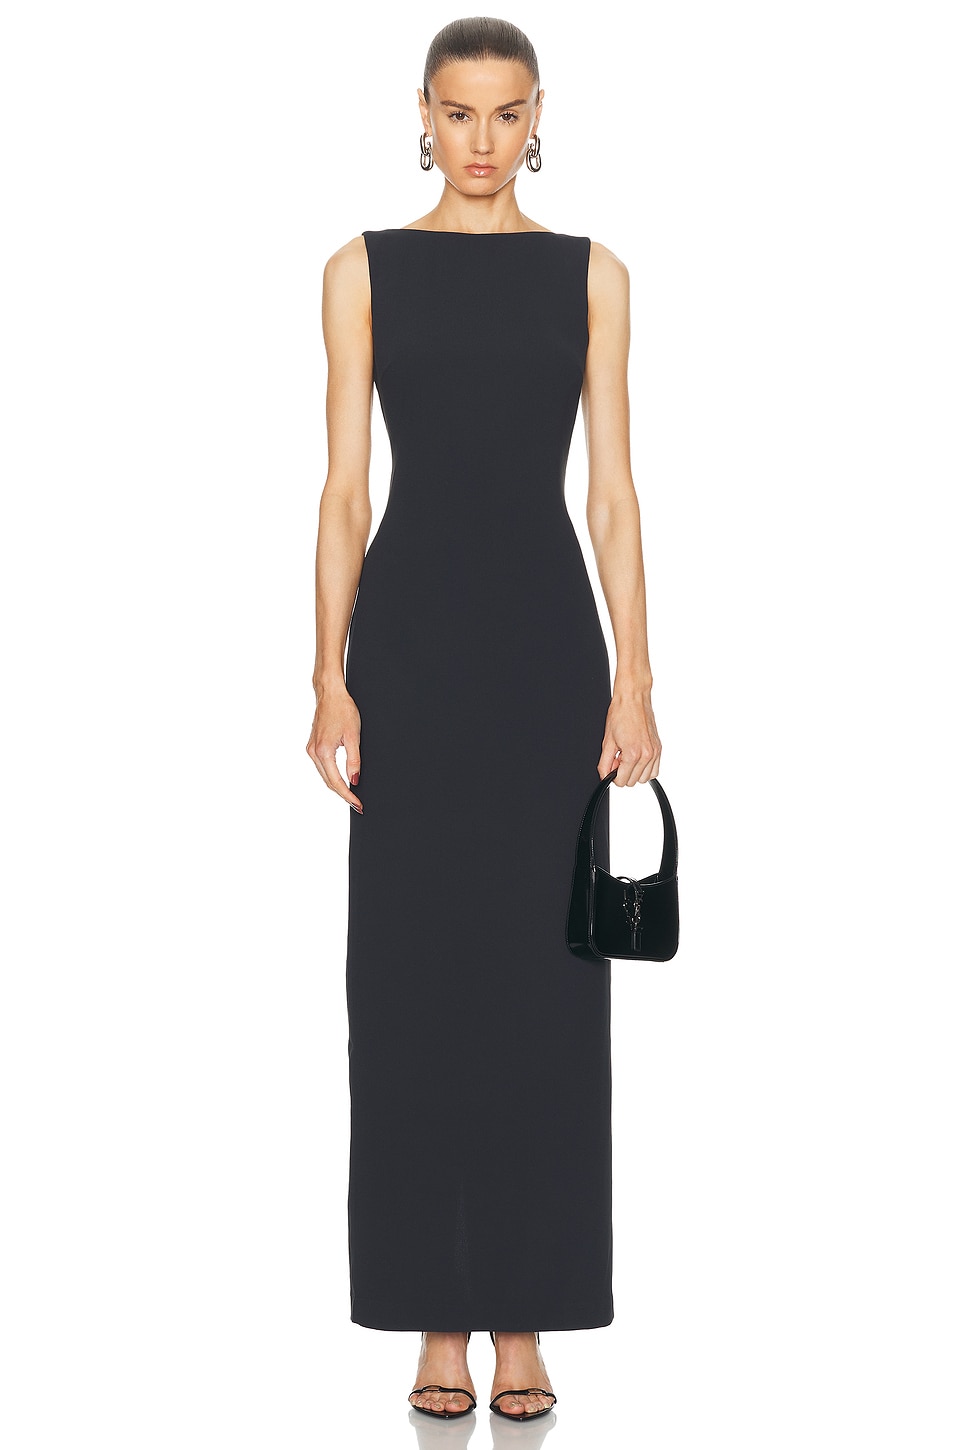 by Marianna Giselle Maxi Dress in Black